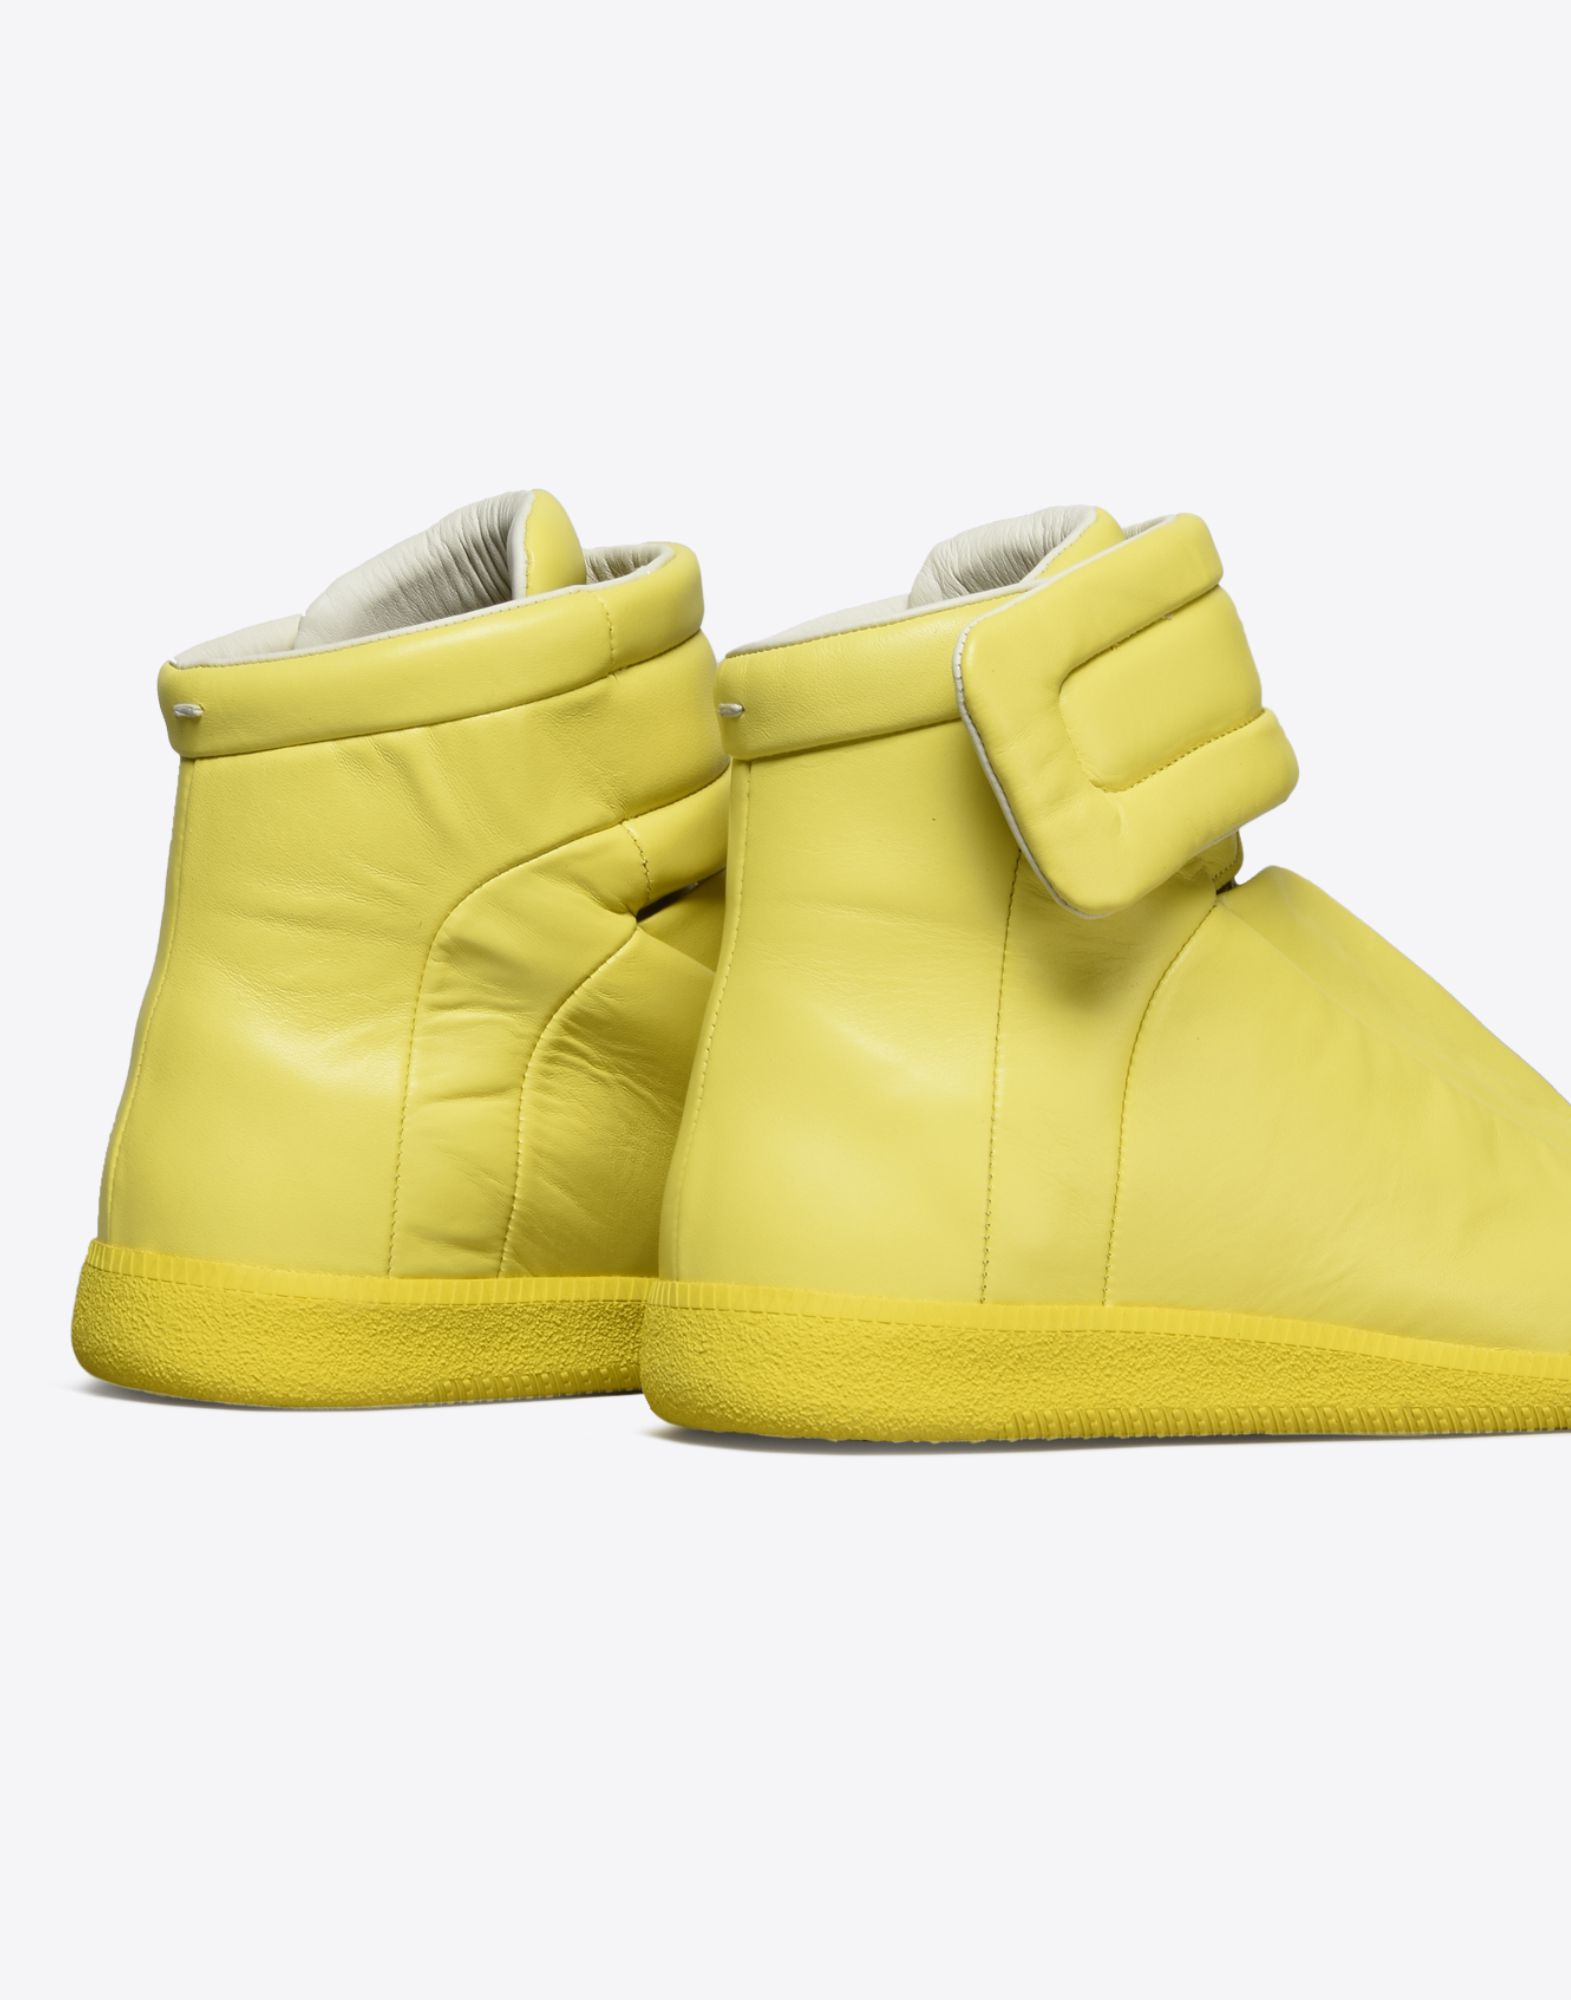 Lyst - Maison Margiela Future High-Top Leather Sneakers in Yellow